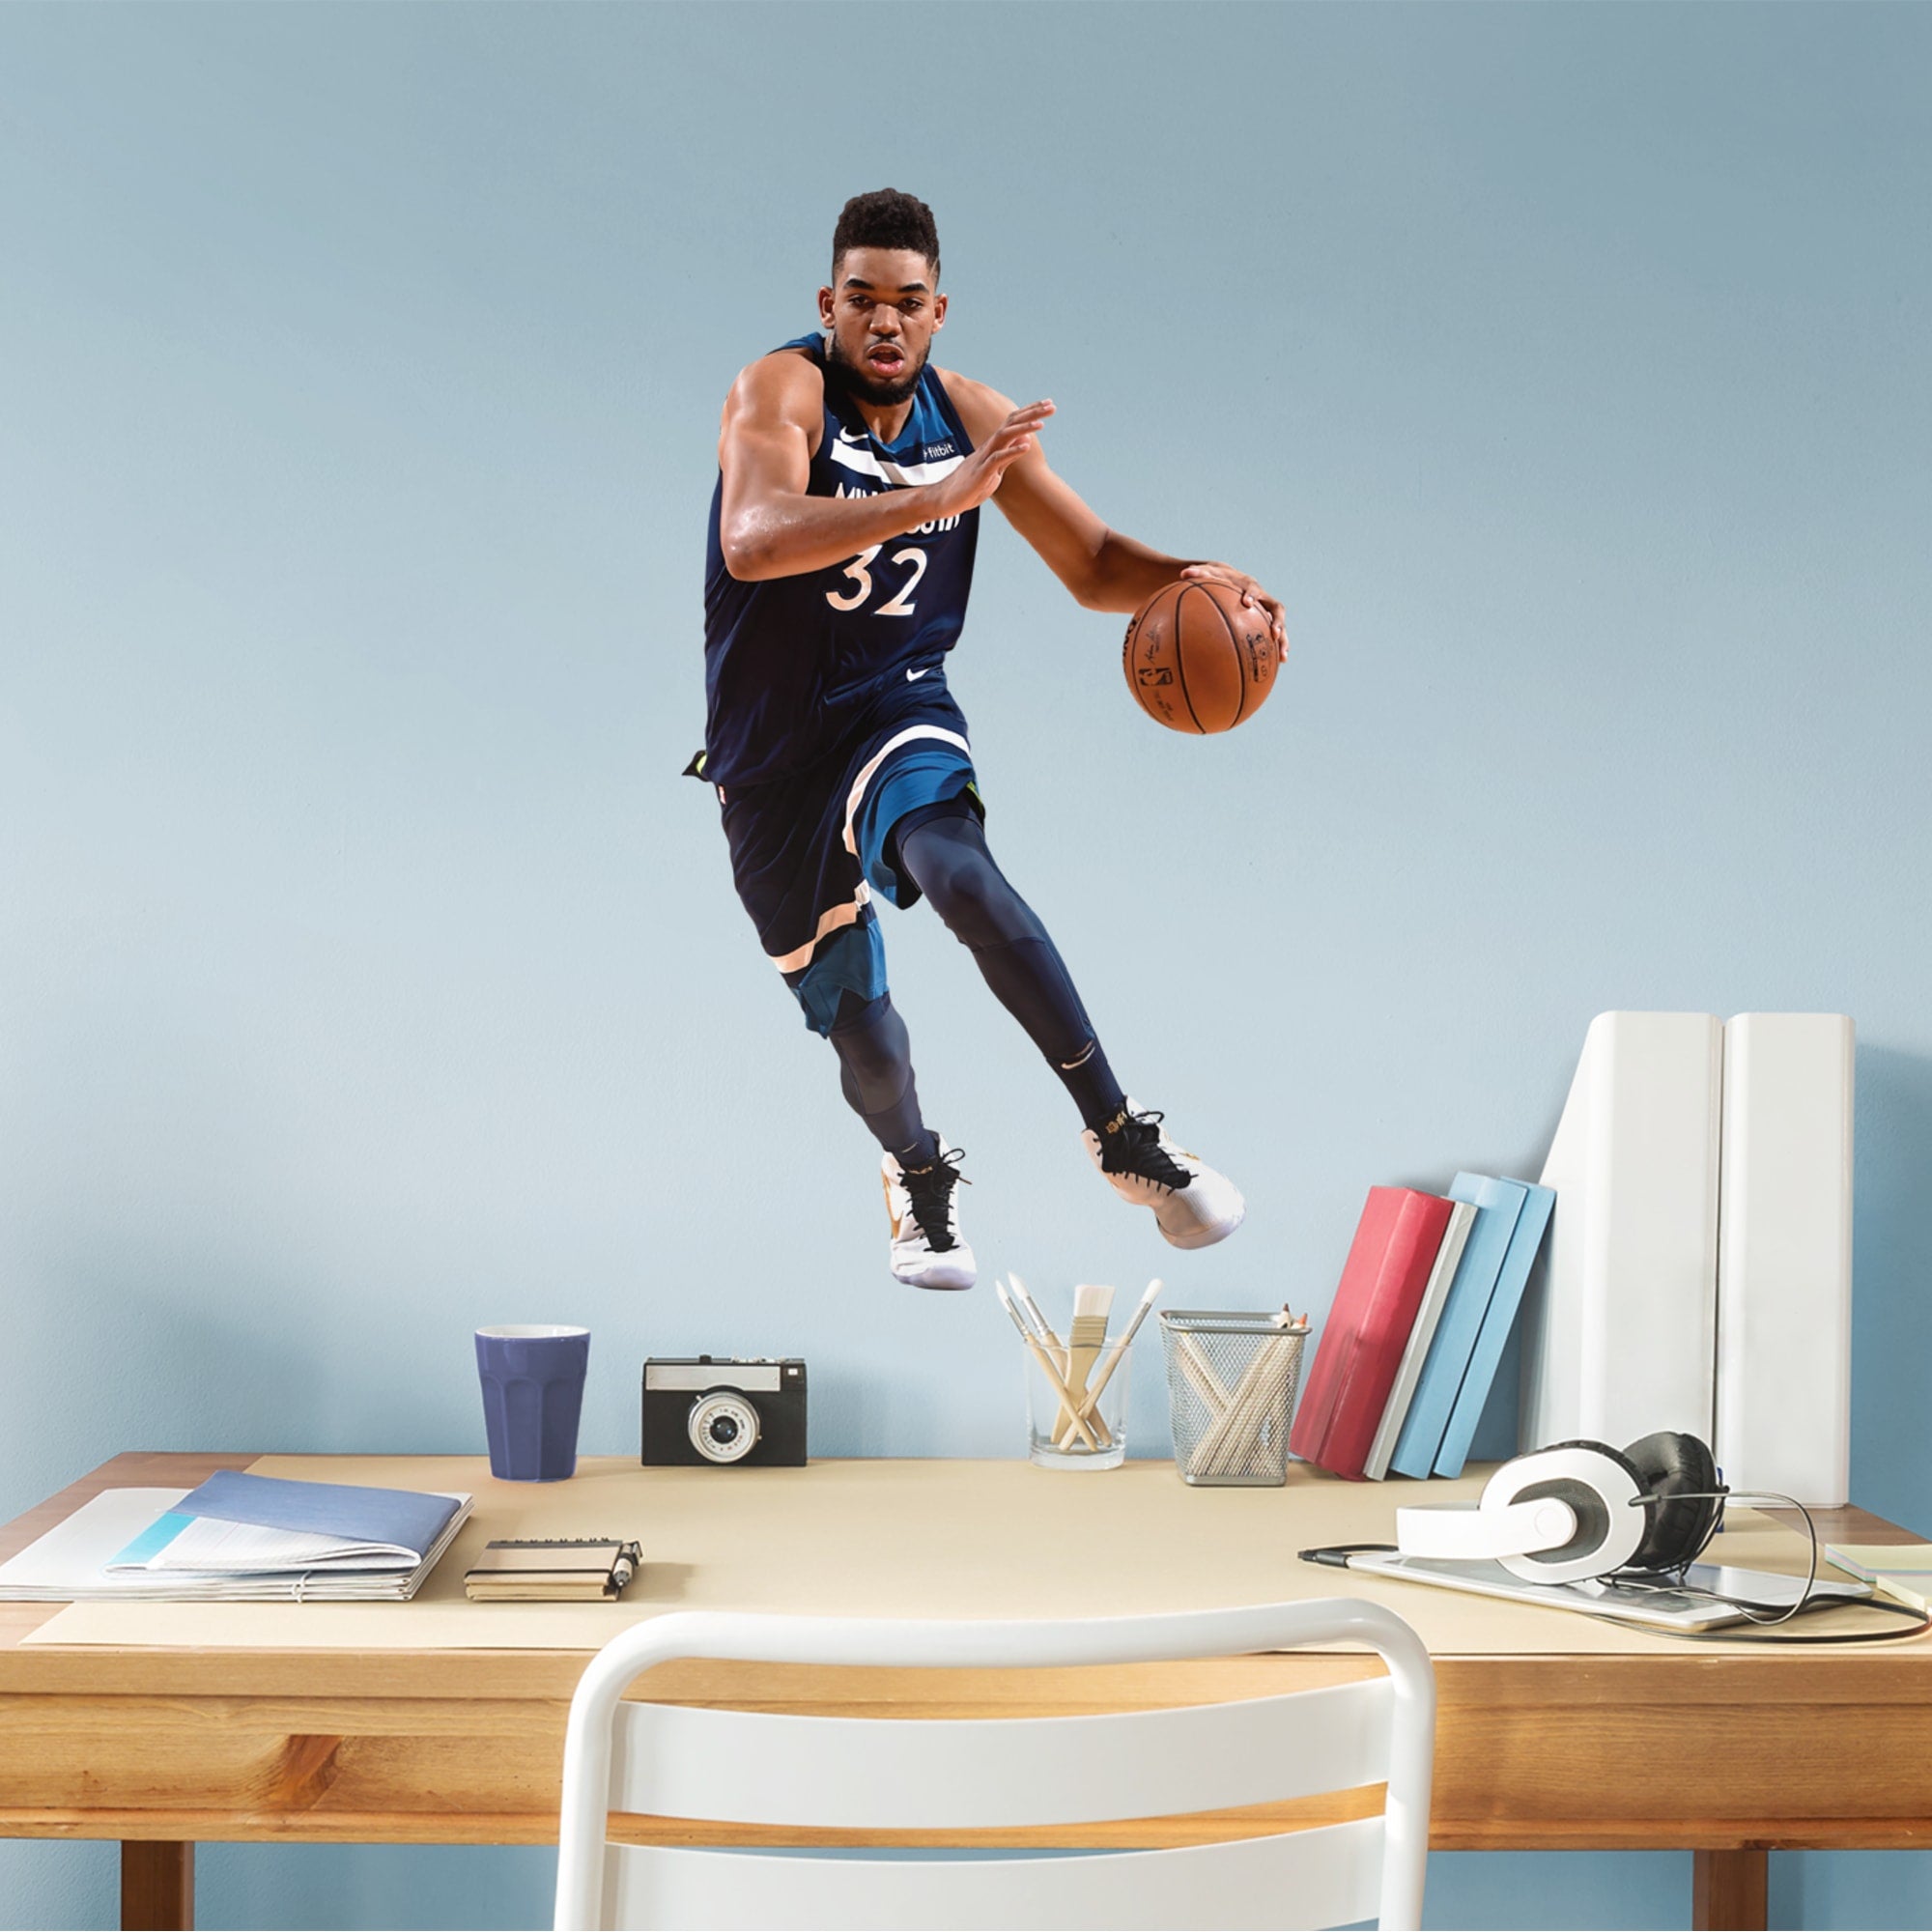 Karl-Anthony Towns for Minnesota Timberwolves: Green Jersey - Officially Licensed NBA Removable Wall Decal 21.0"W x 38.0"H by Fa